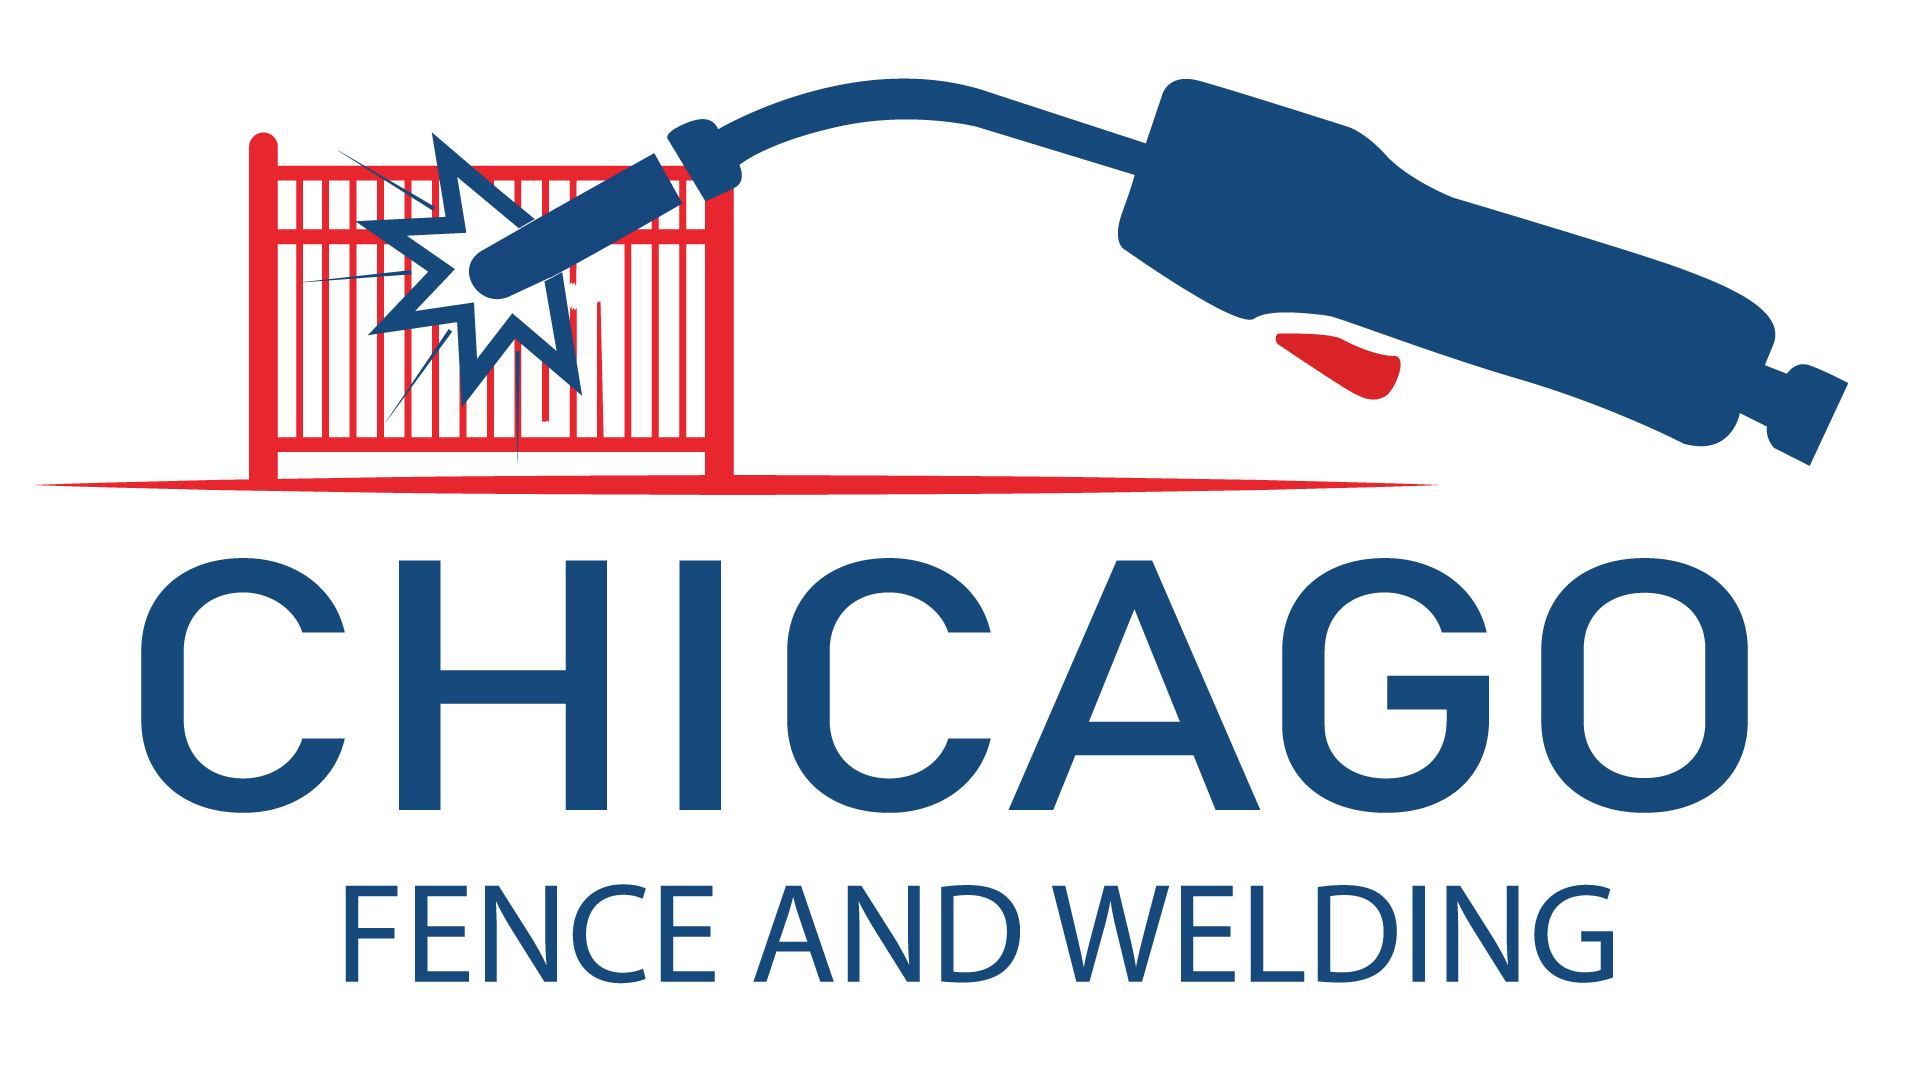 Chicago Fence And Welding